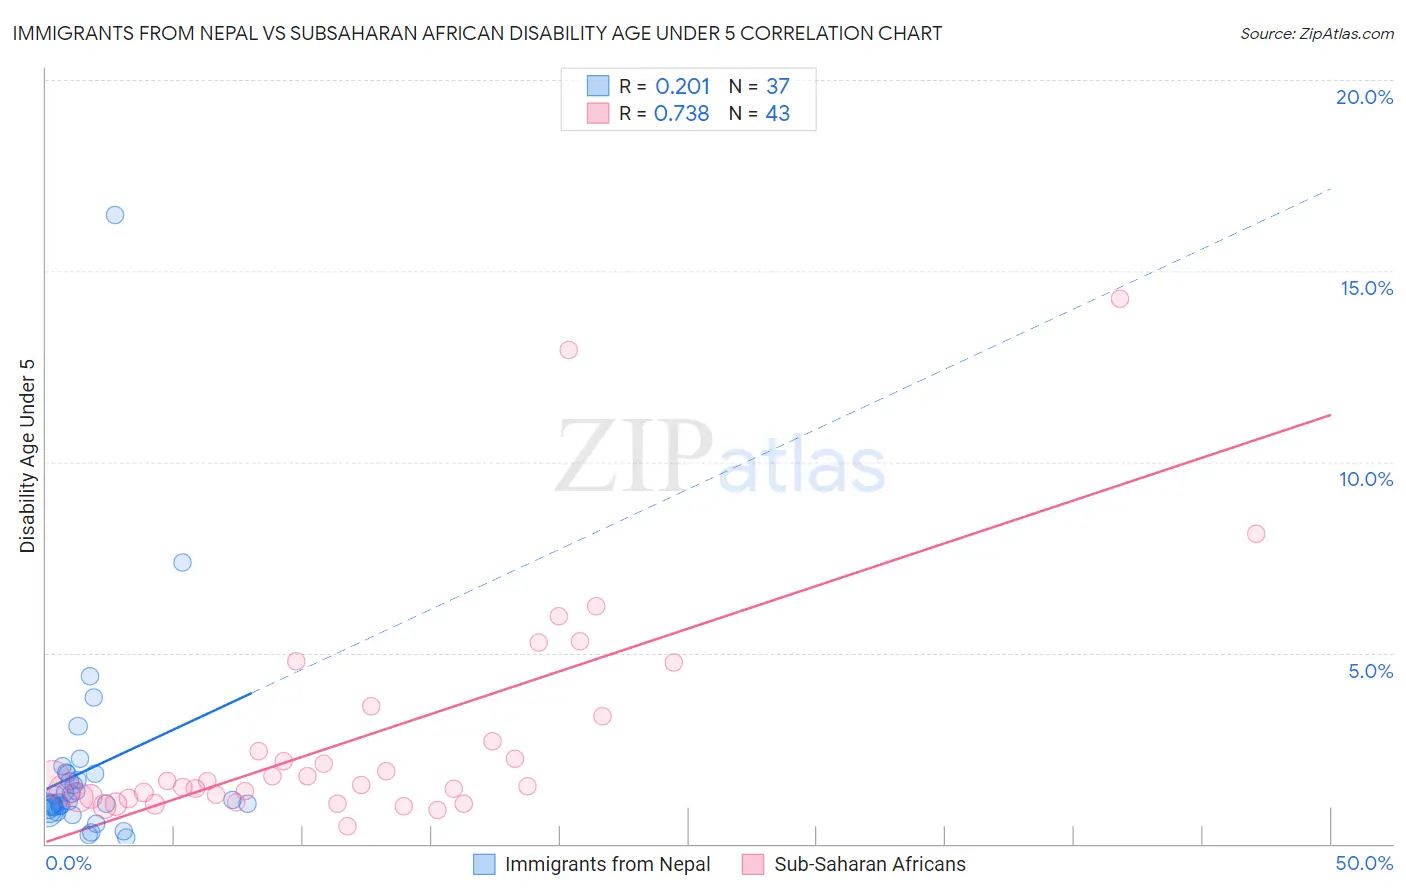 Immigrants from Nepal vs Subsaharan African Disability Age Under 5